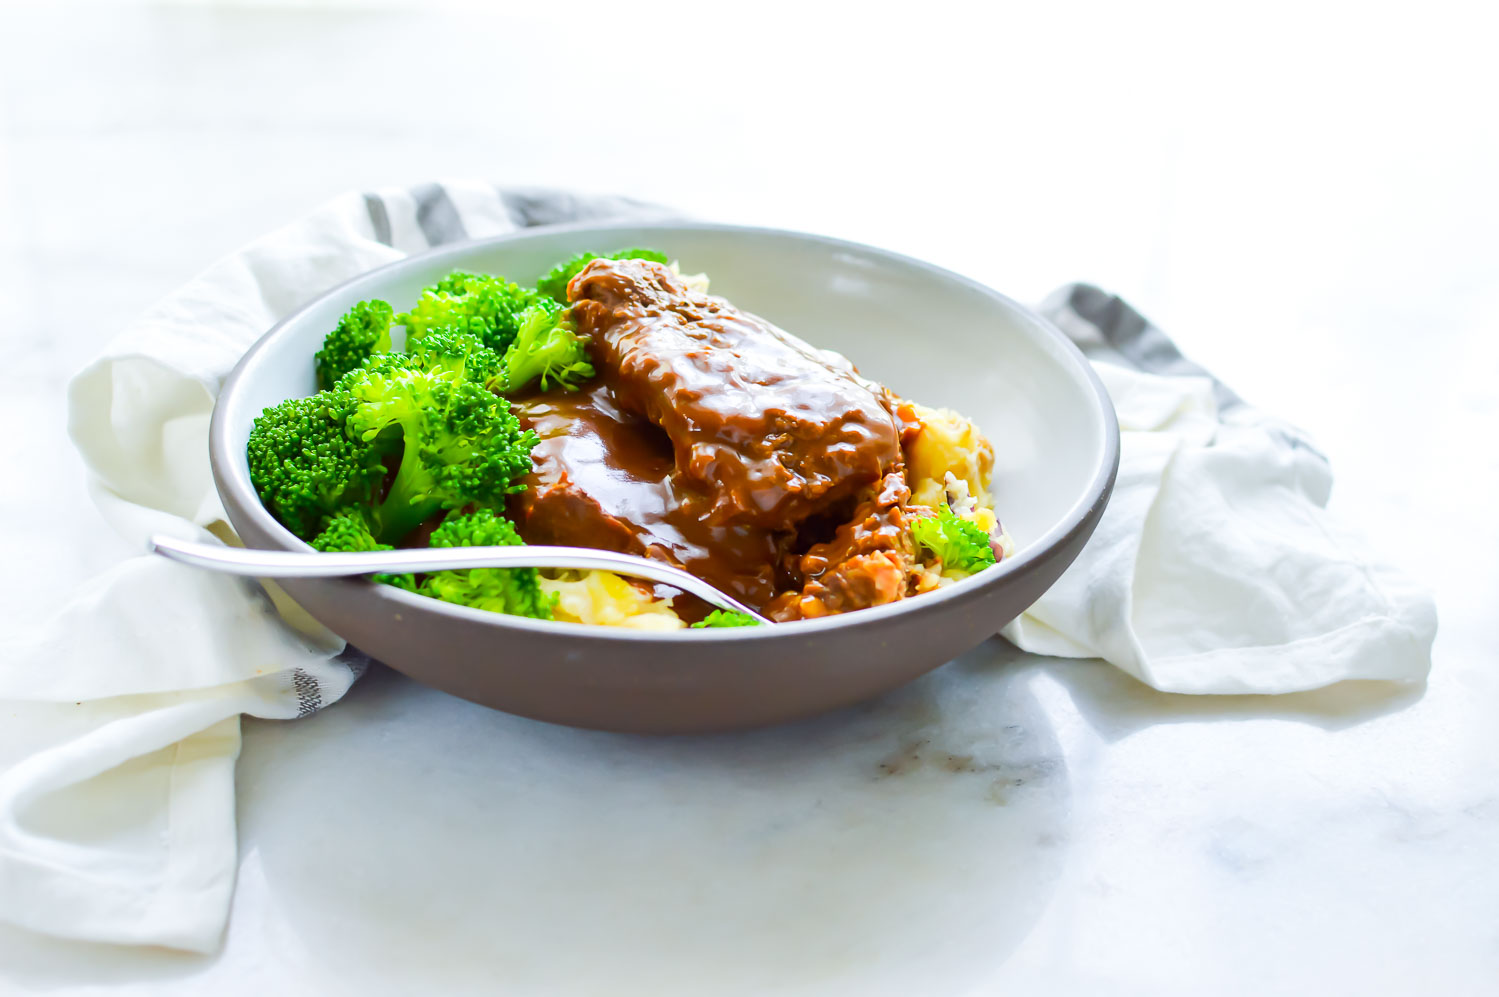 A white bowl with gray rim with meat, gravy, potato, and broccoli with a fork in it and a towel around it.